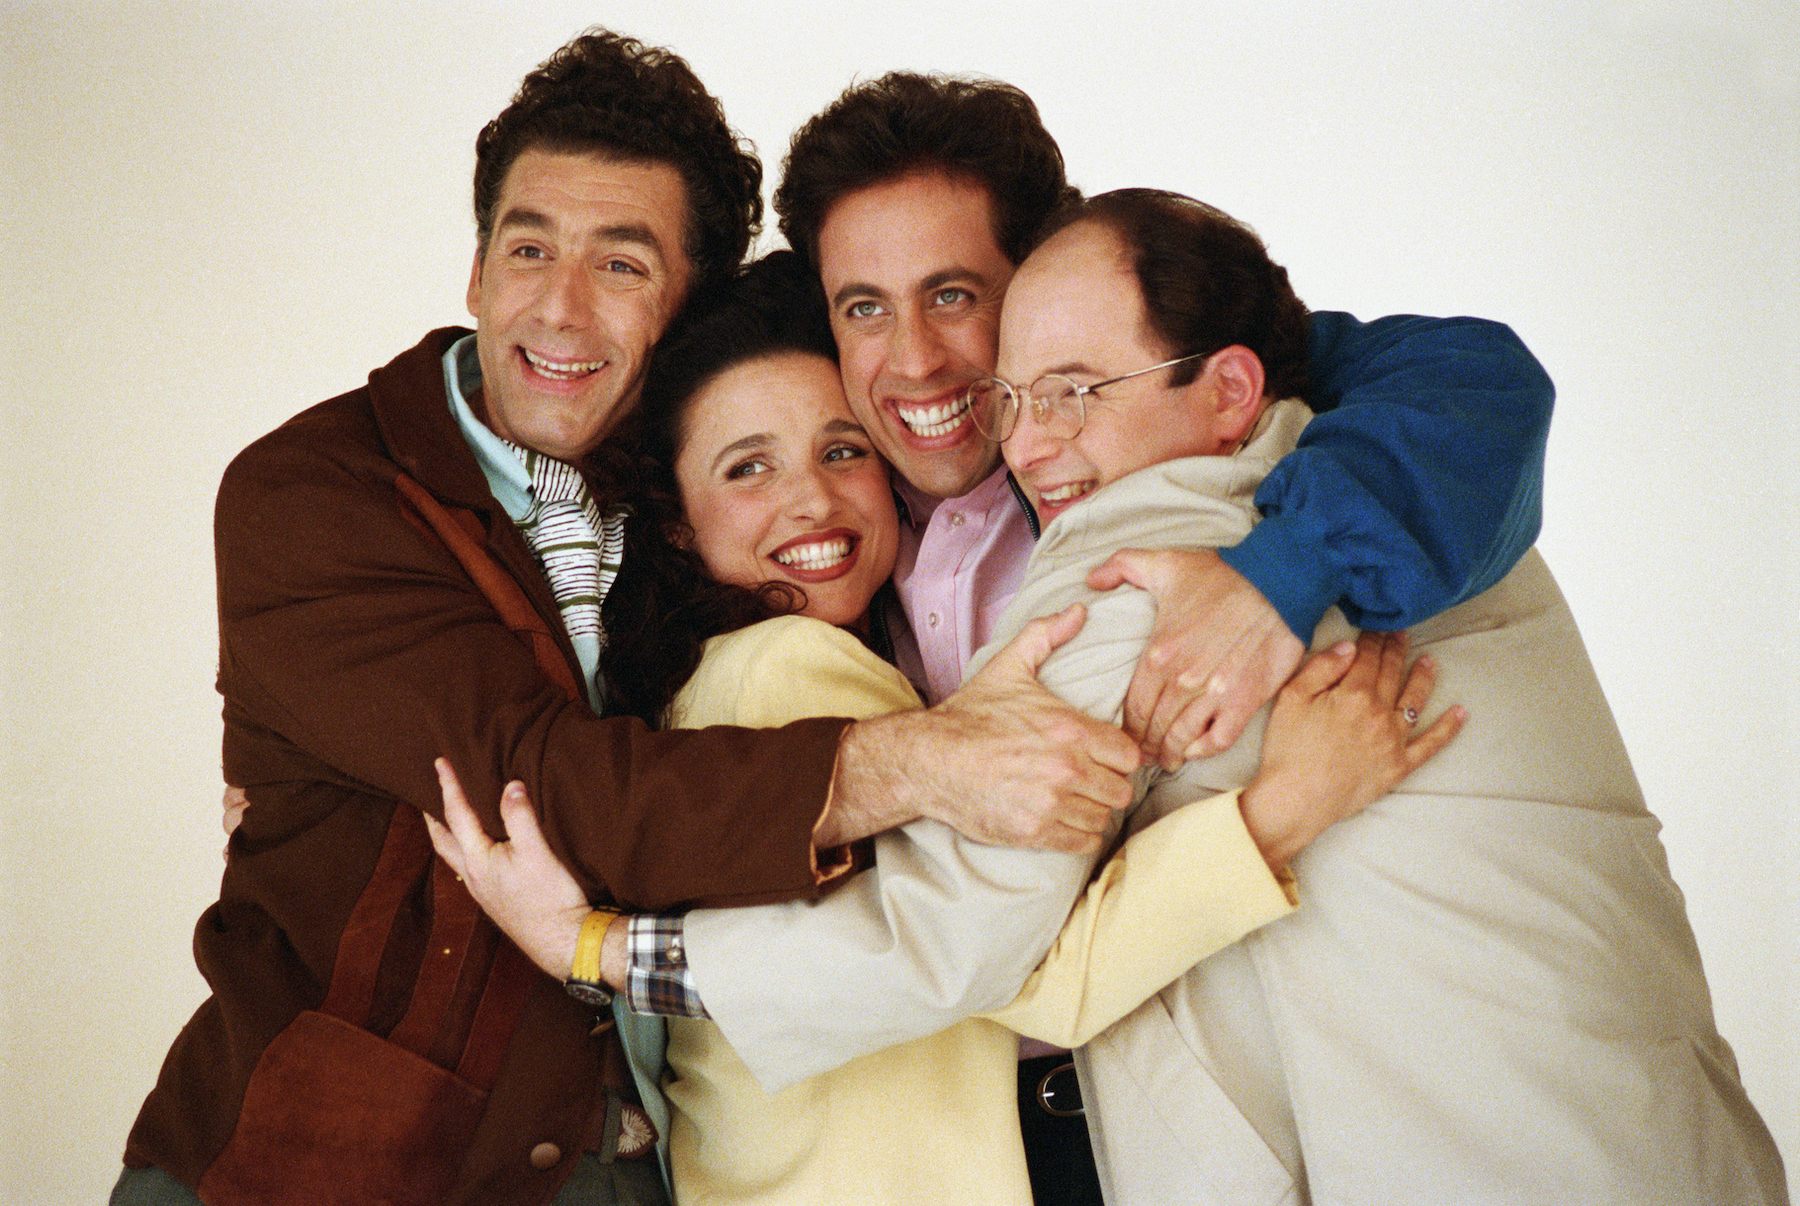 The cast of 'Seinfeld'